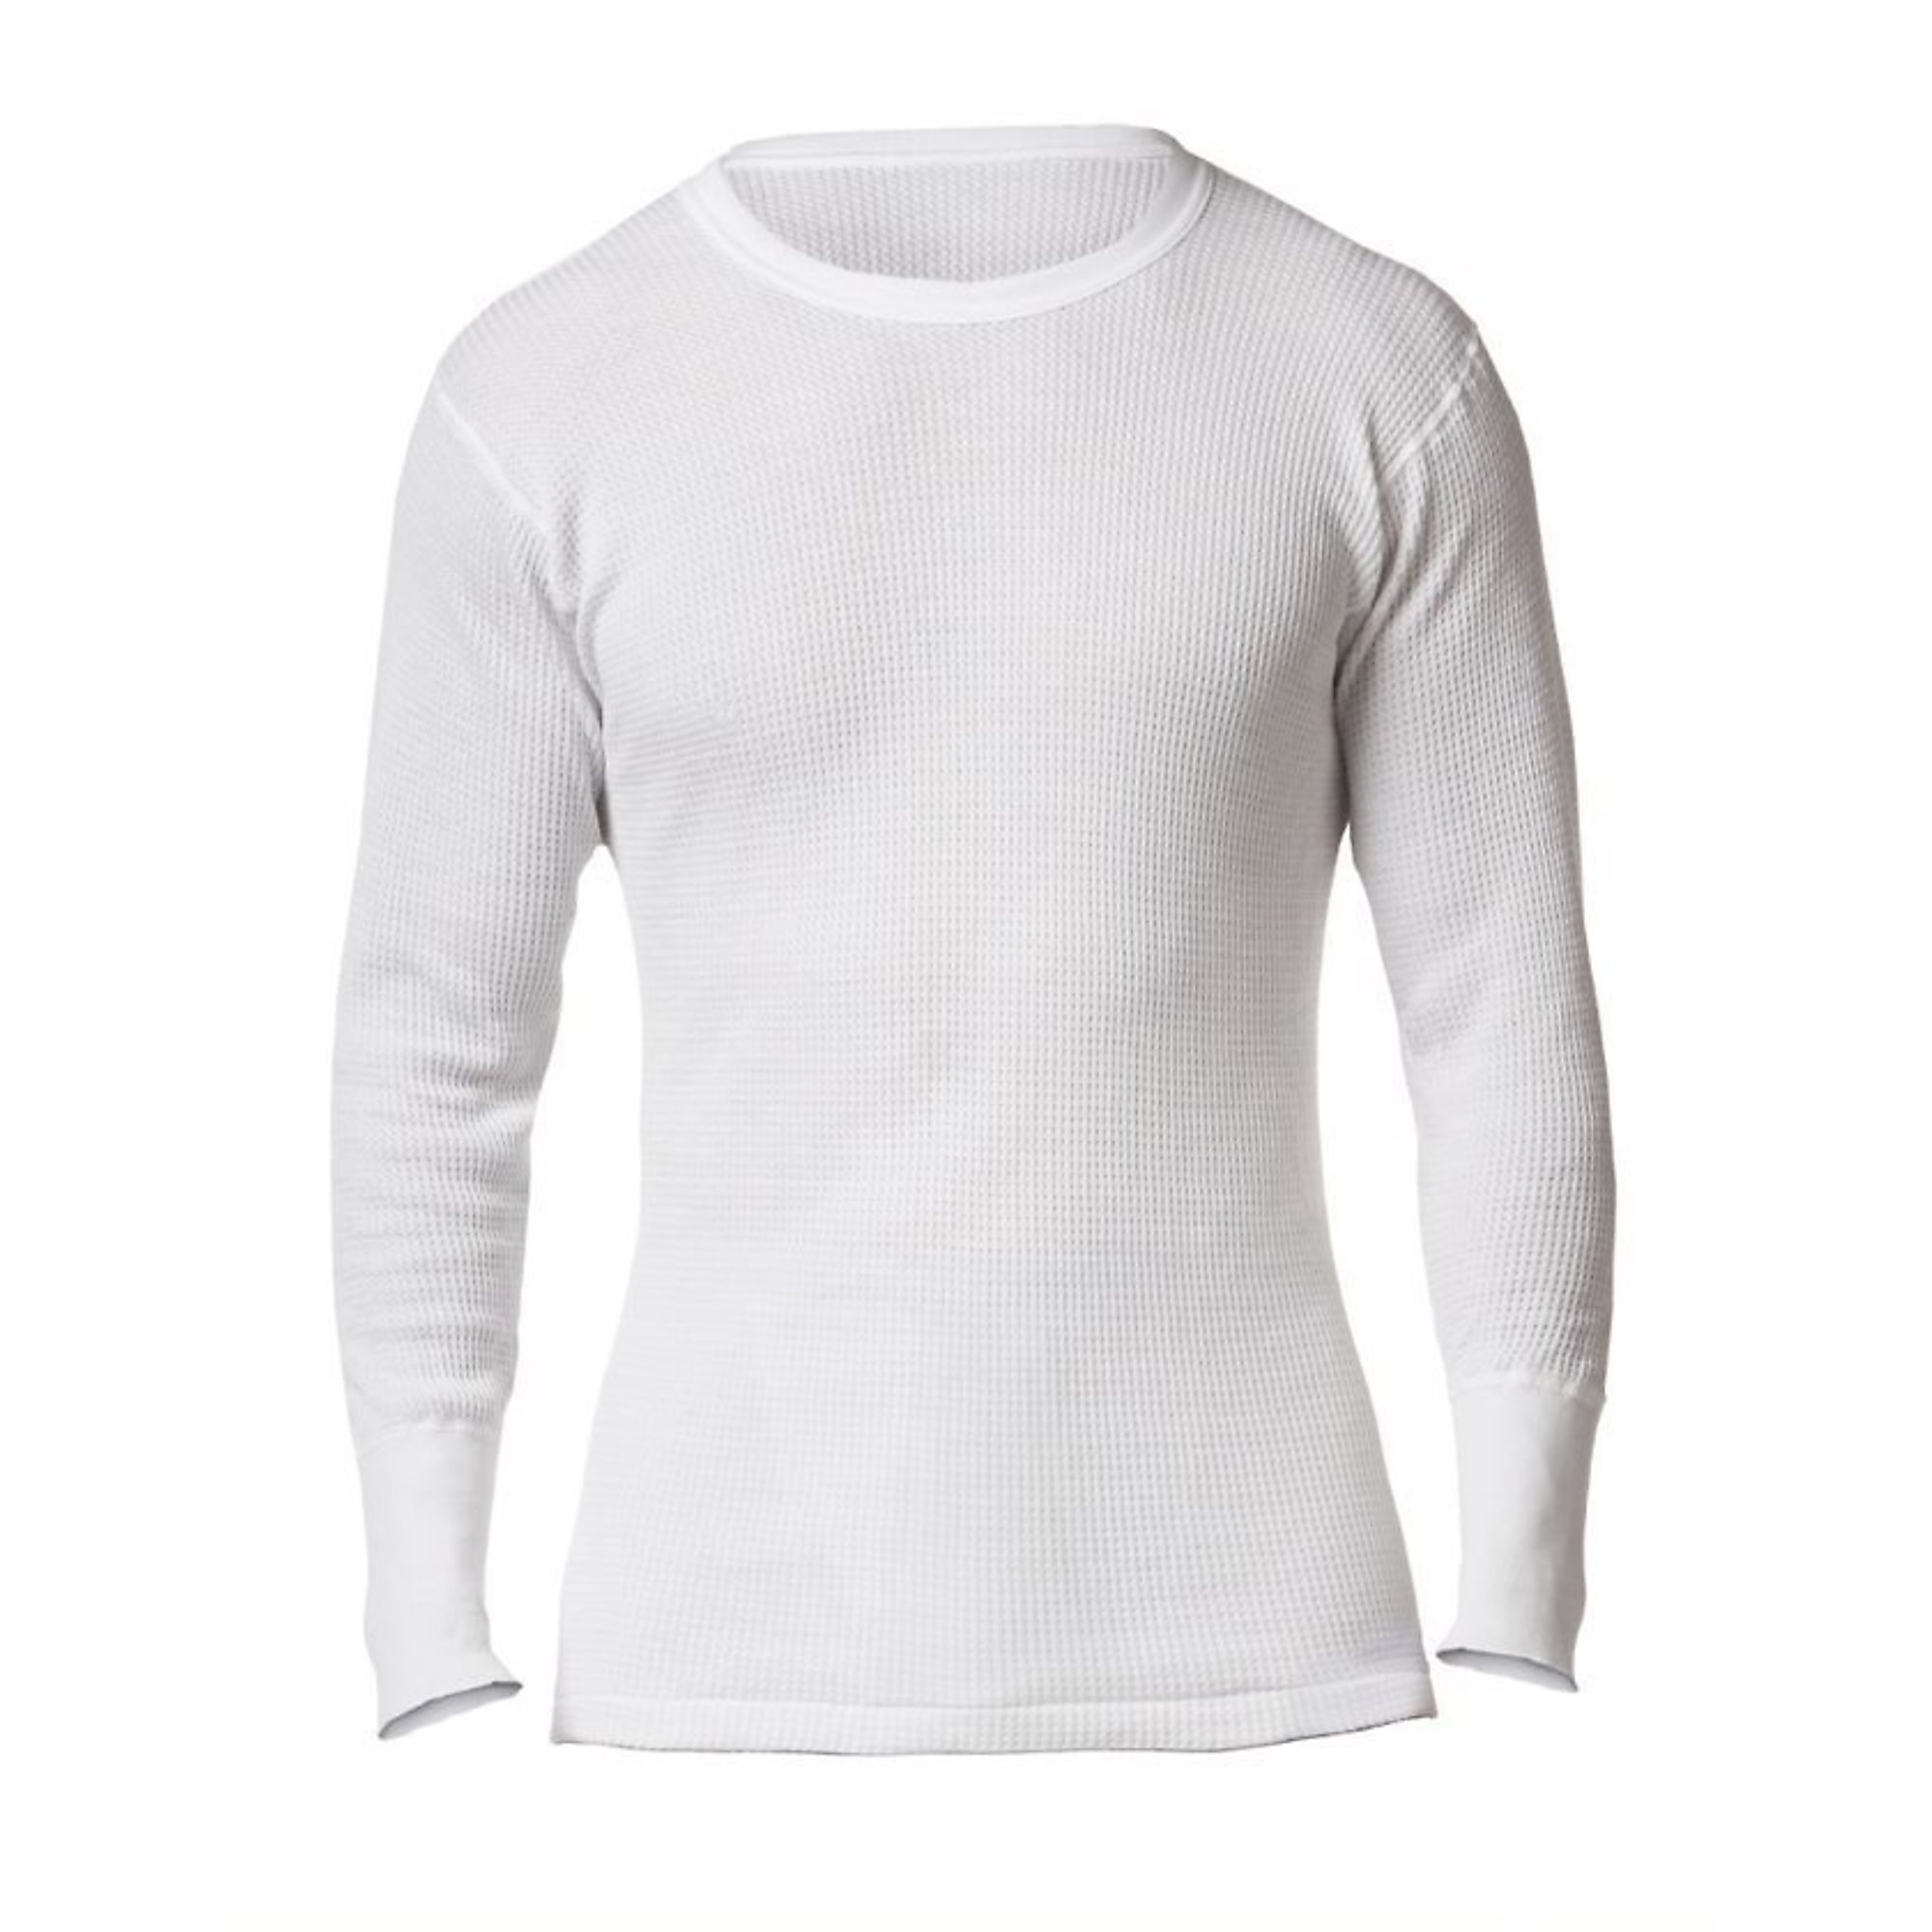  Stanfield's Men's Long Sleeve Waffle Base Layer Top